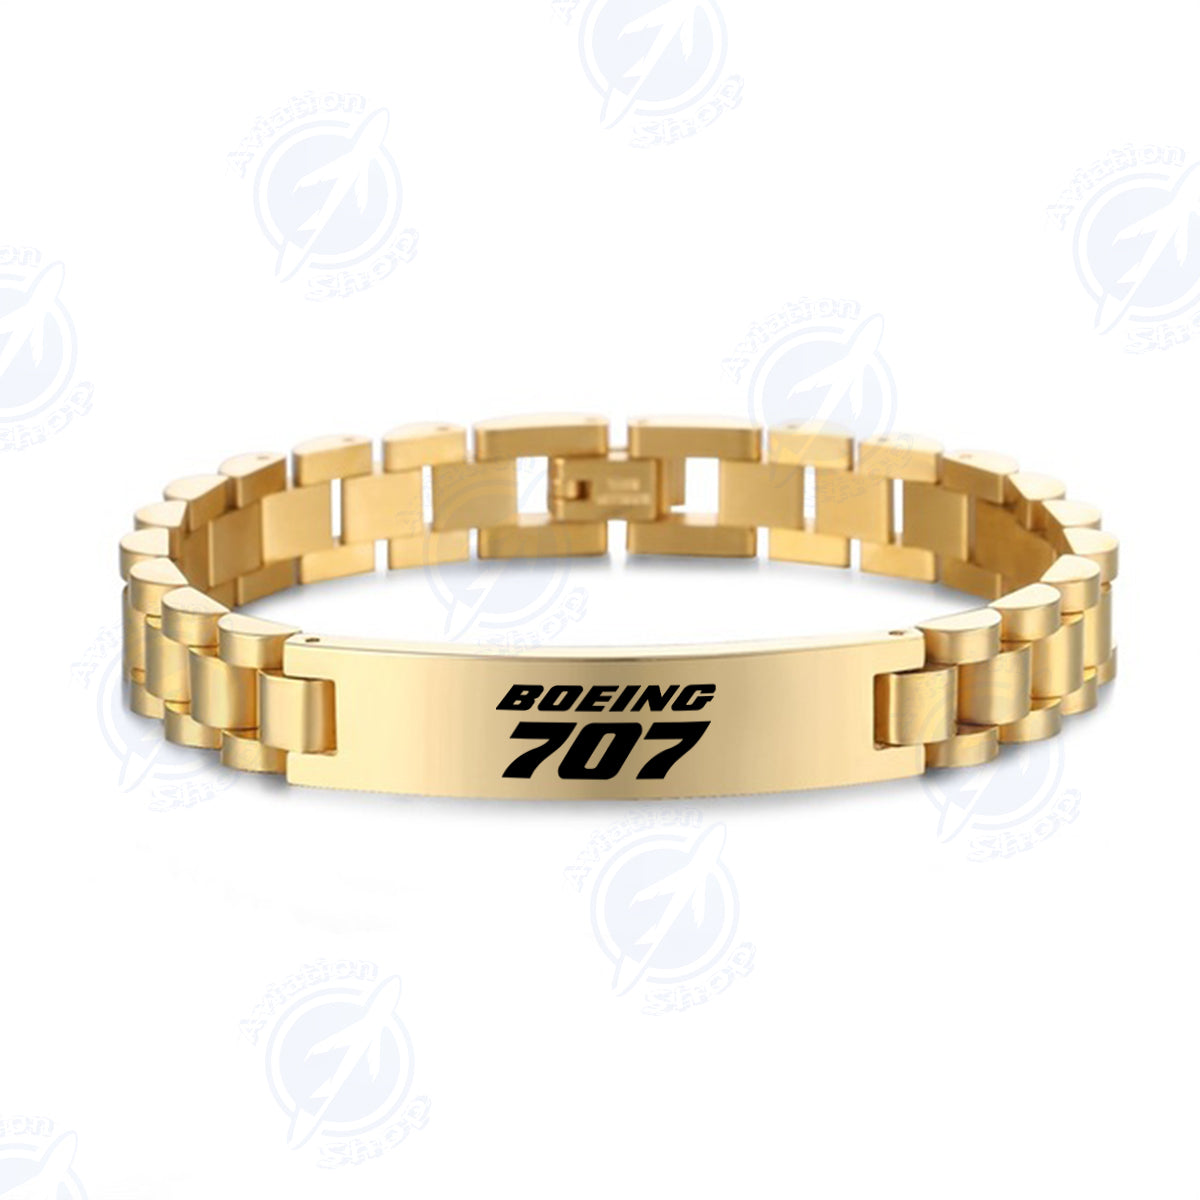 Boeing 707 & Text Designed Stainless Steel Chain Bracelets